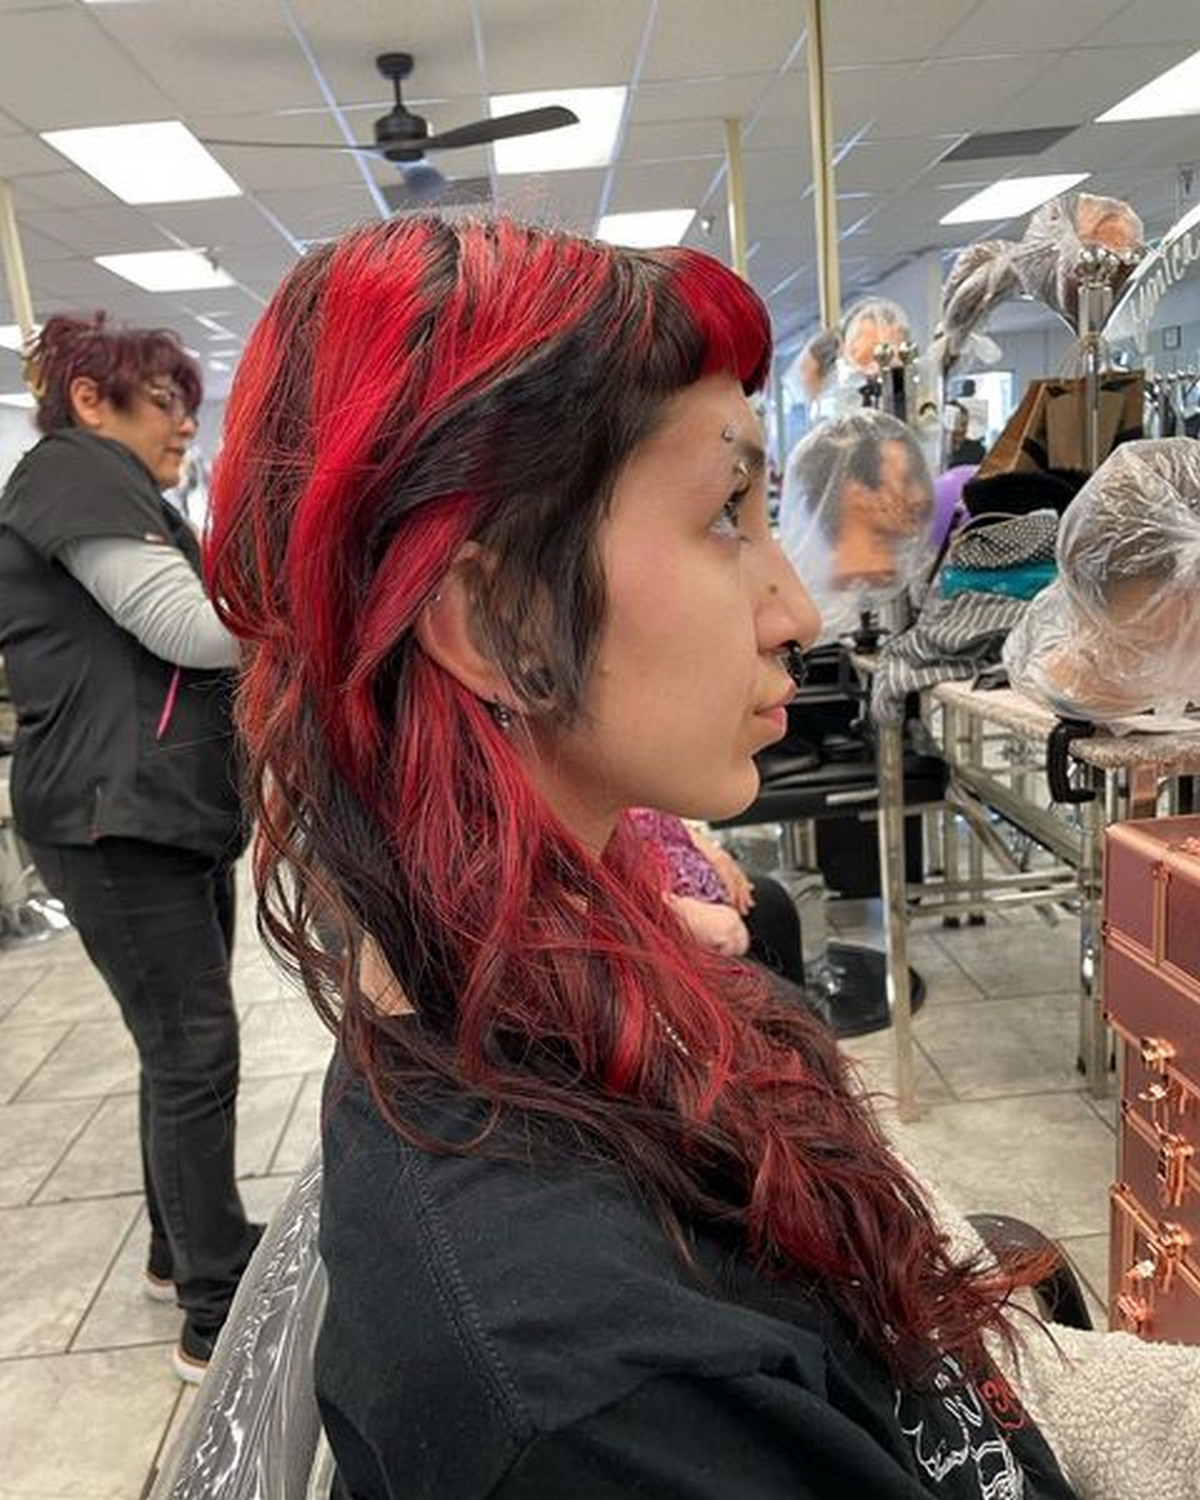 Punk Black Hairstyle With Bold Red Highlights